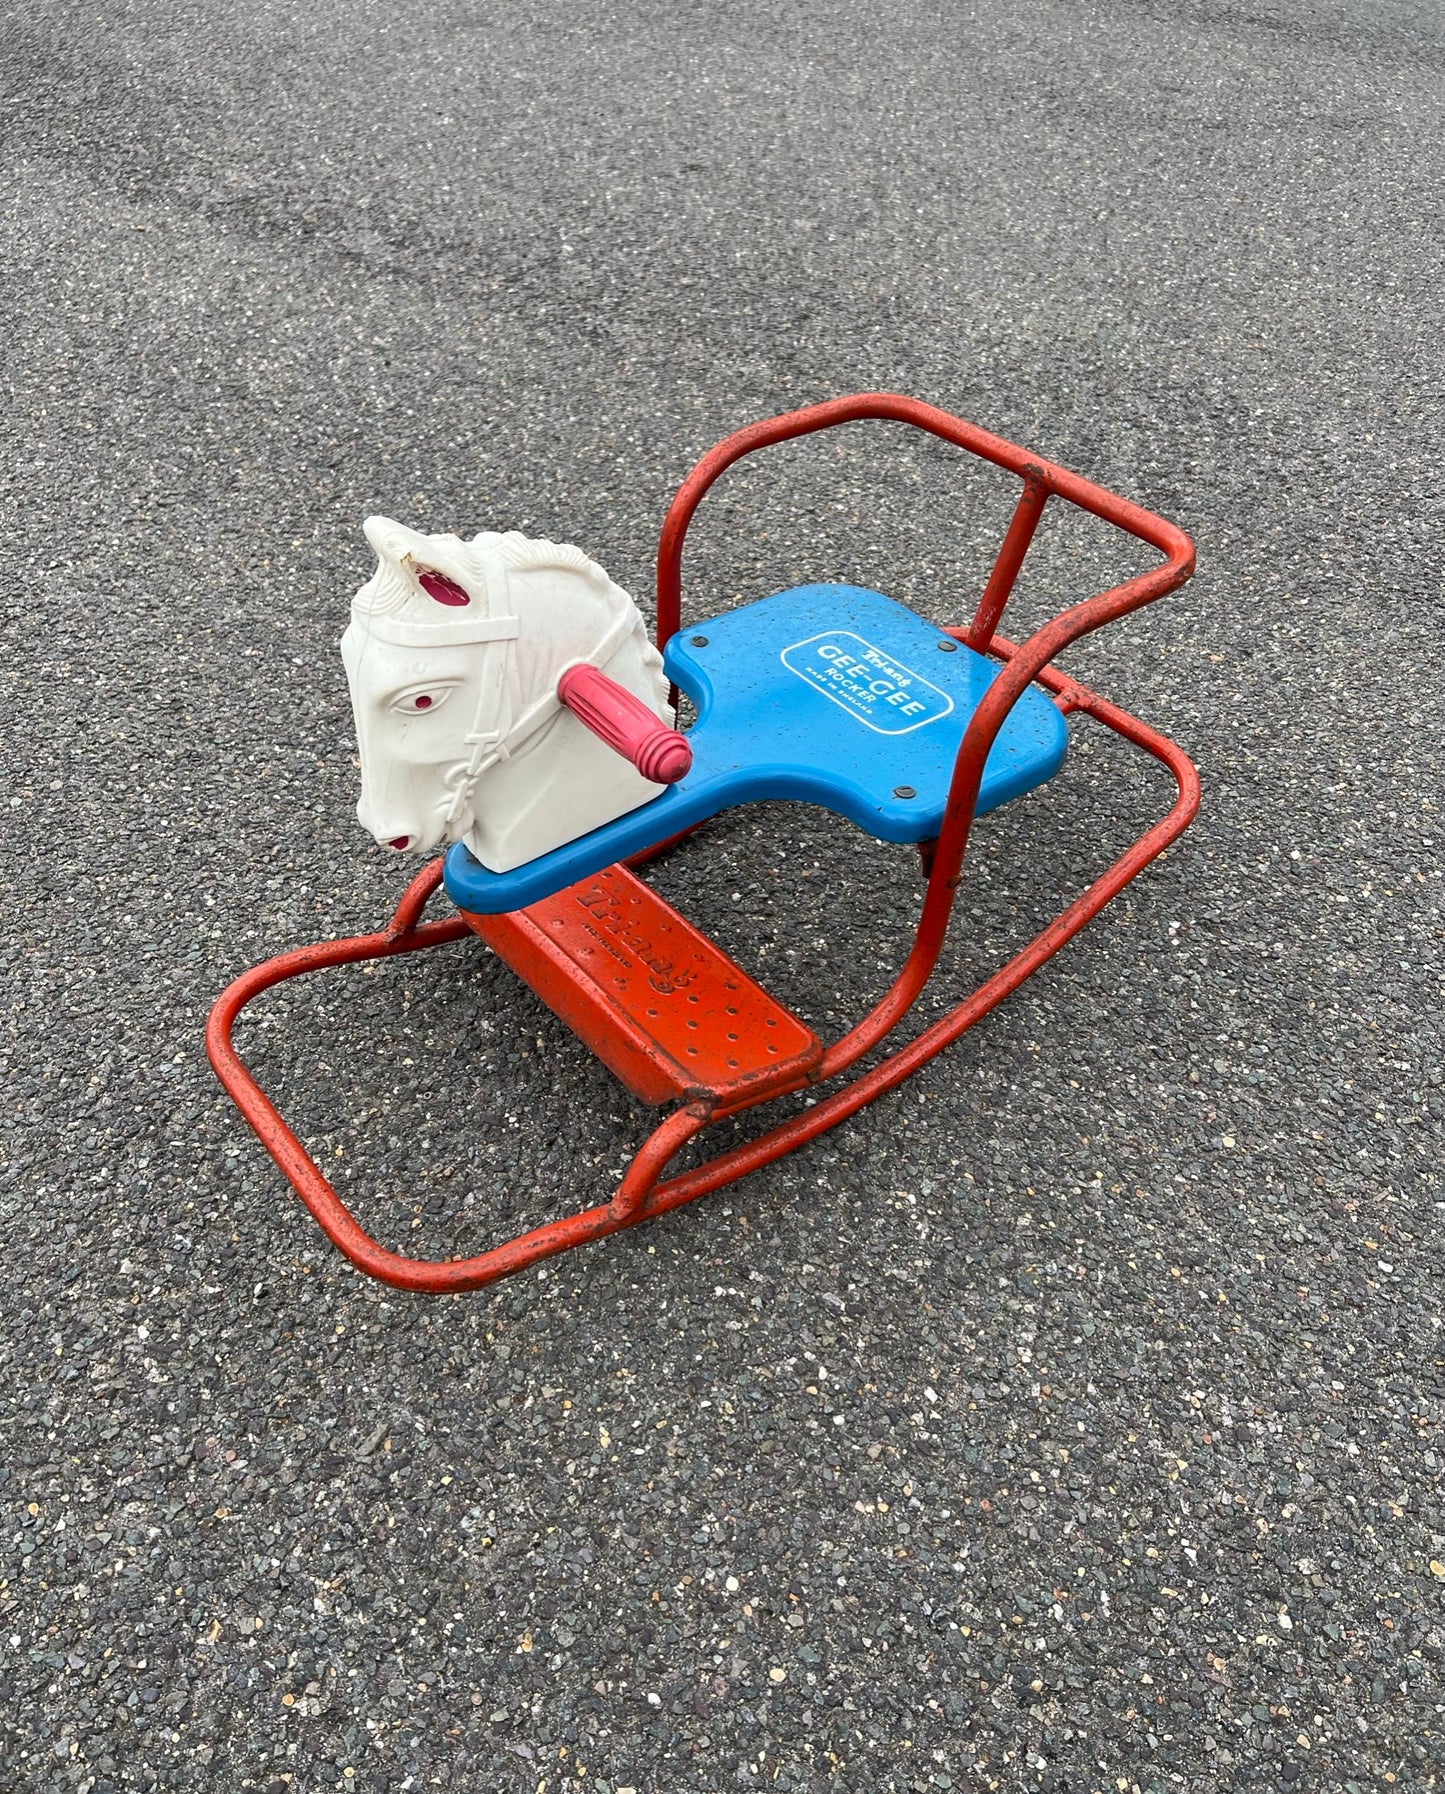 Vintage Tri-Ang Gee-Gee Rocker Metal Rocking Horse Classic Triang Retro Toy